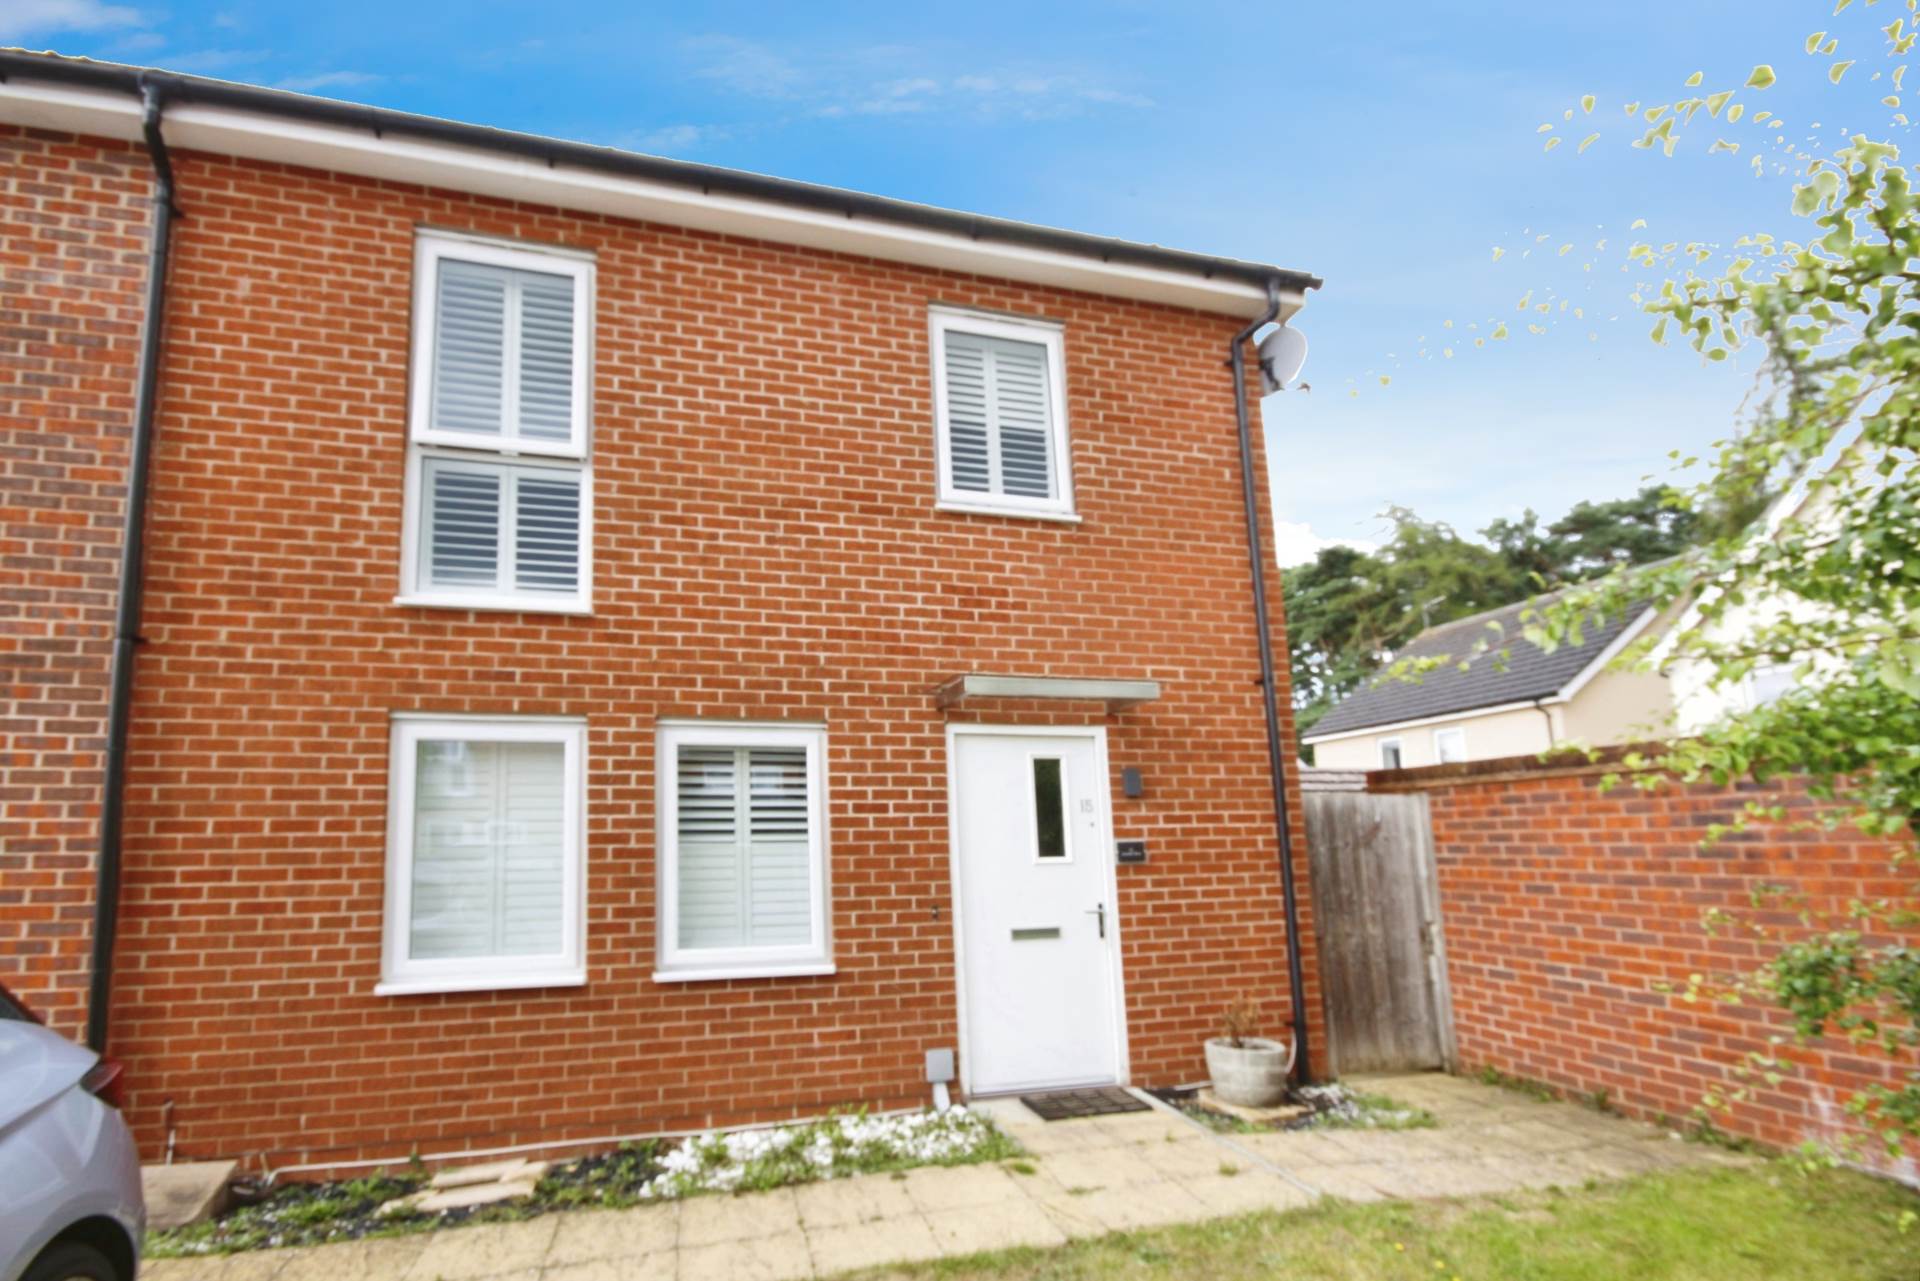 3 bed End Terraced House for rent in Bracknell. From Sears Property - Bracknell